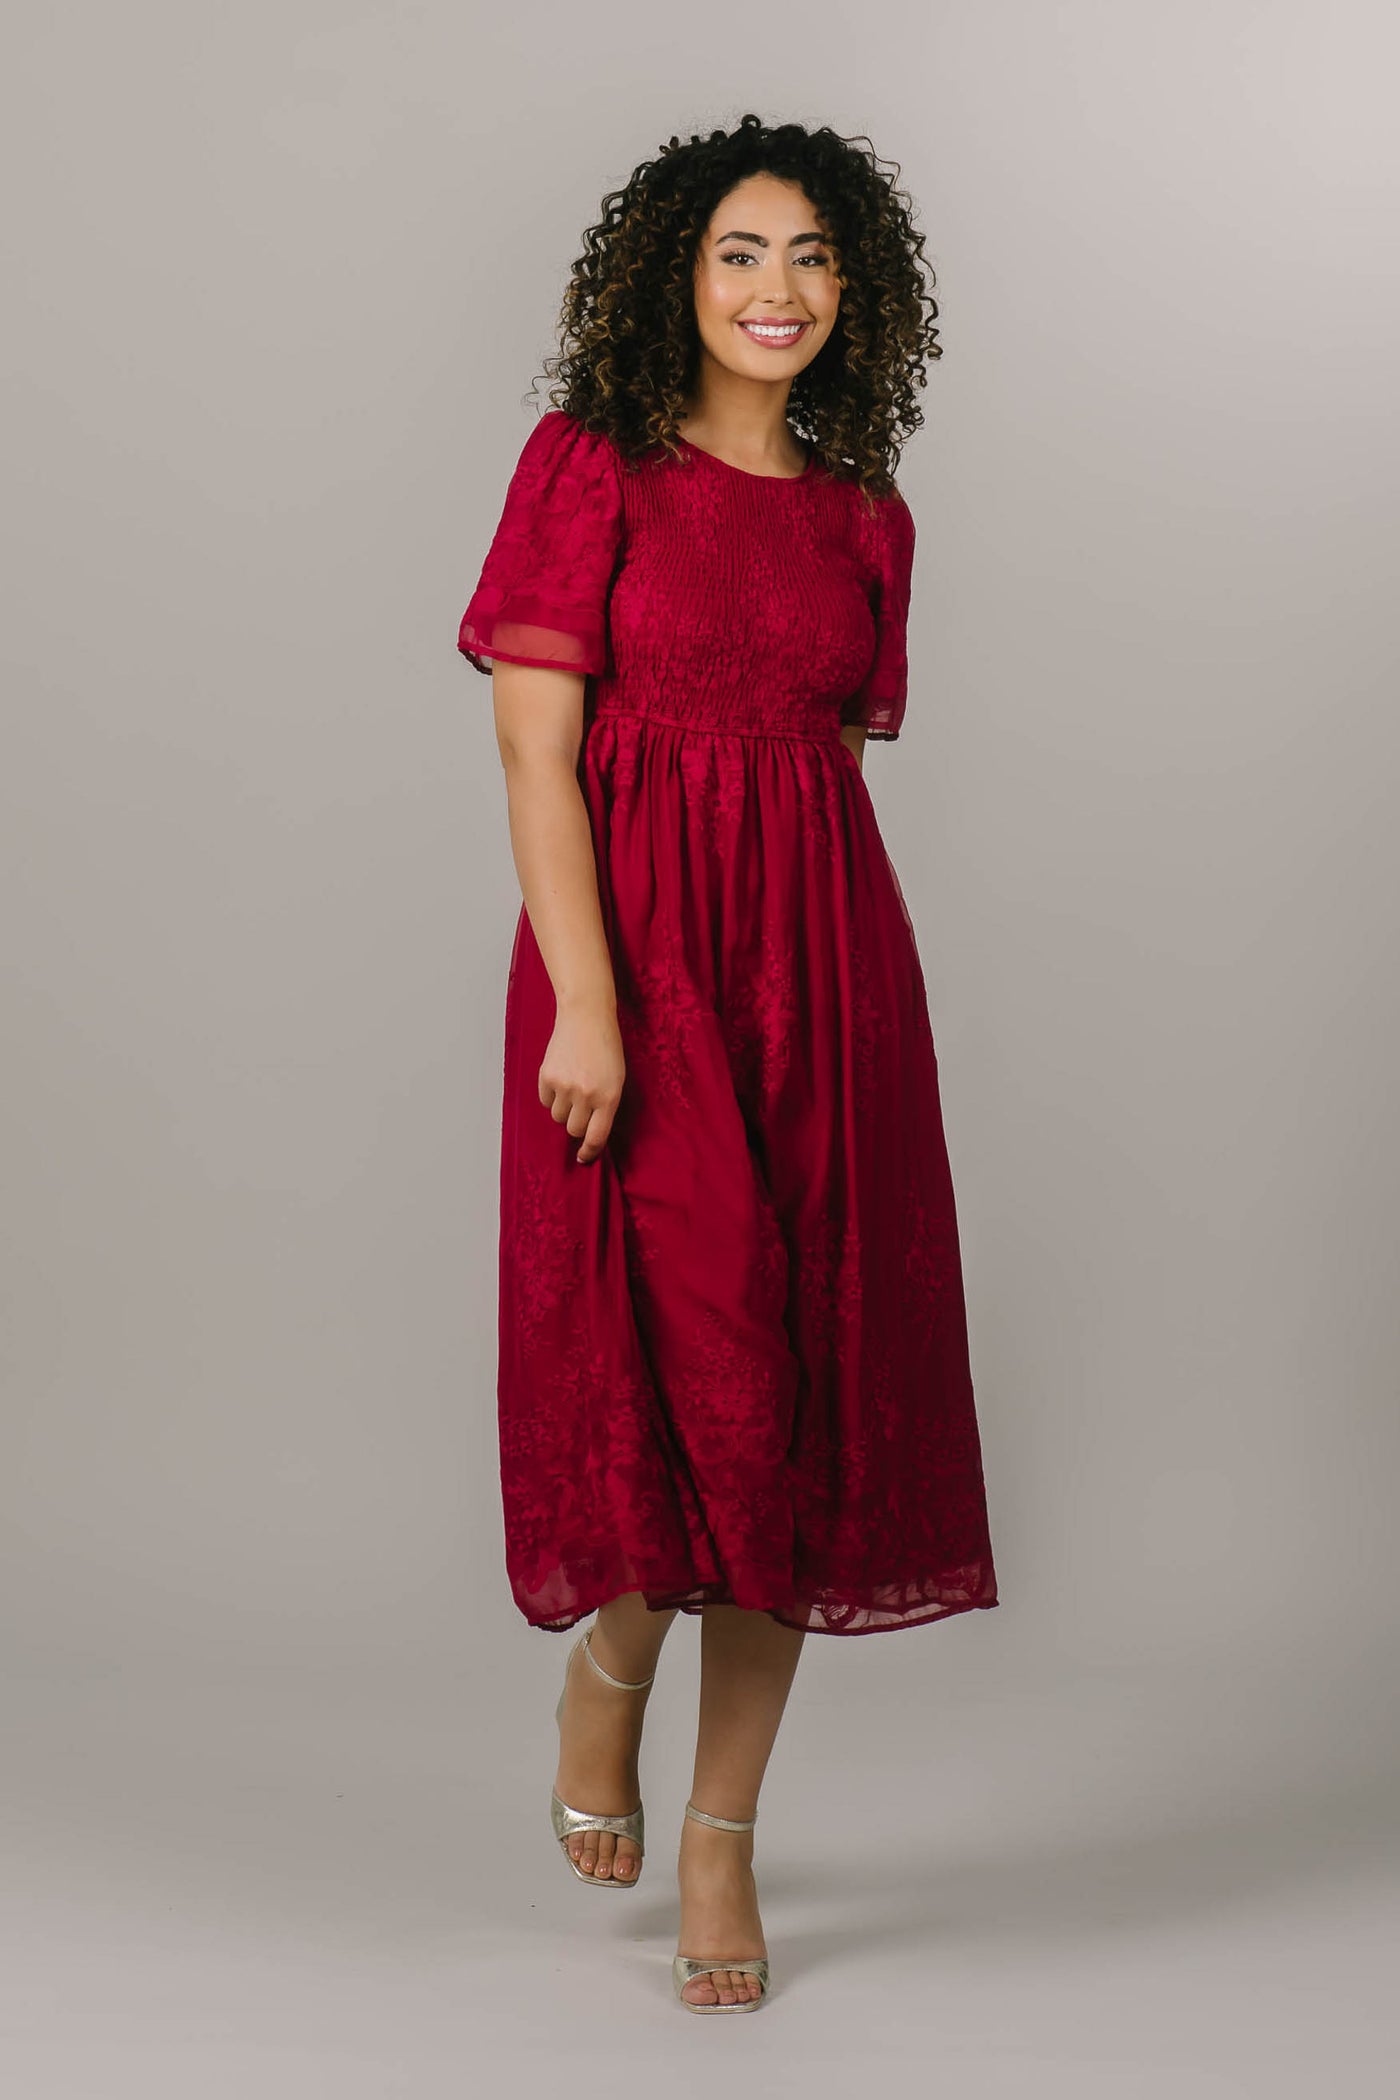 This beautiful modest bridesmaid dress features embroidered flowers and a fun magenta color.